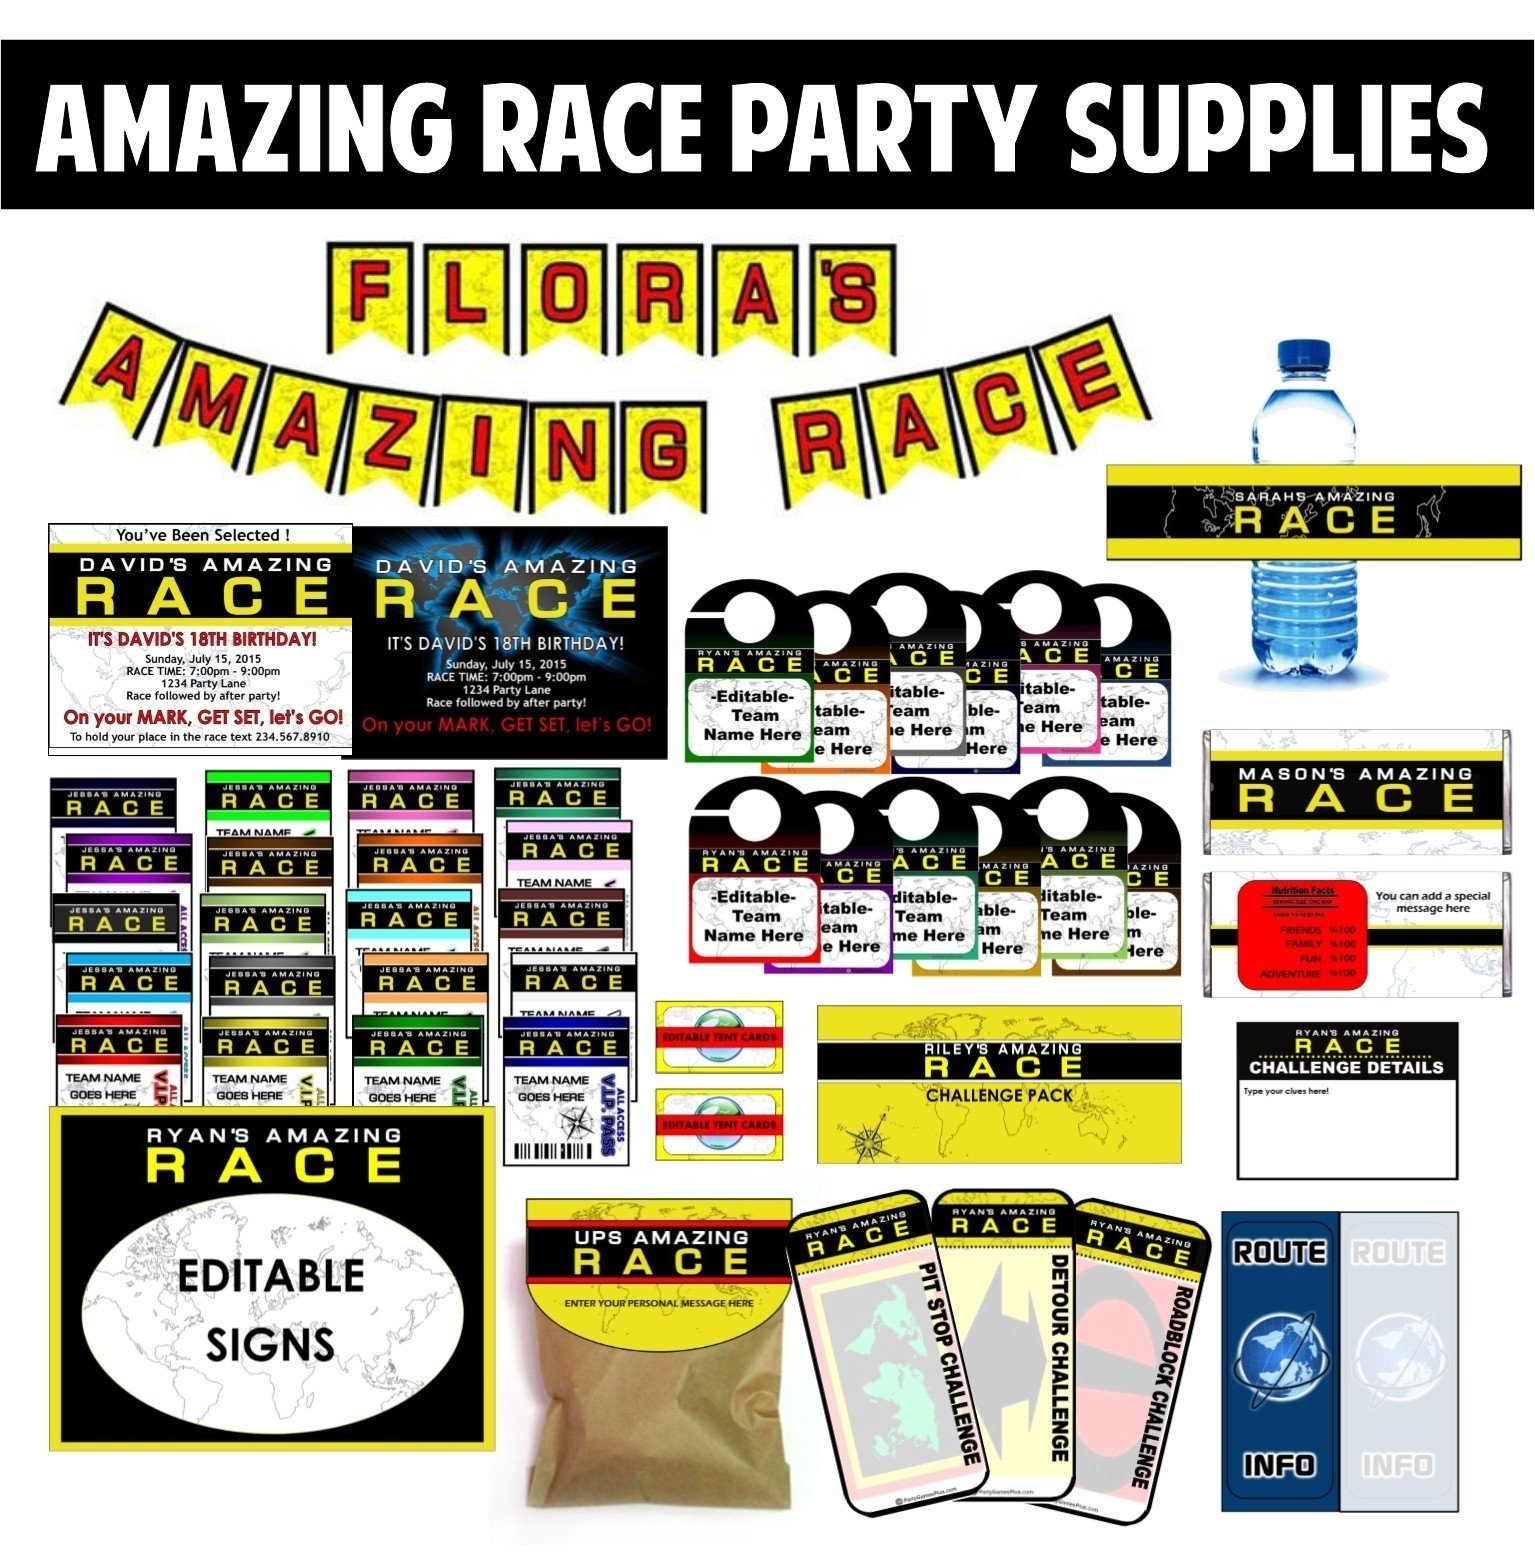 10 Wonderful Amazing Race Birthday Party Ideas amazing race party ideas for pit stops challenges clues and supplies 1 2022